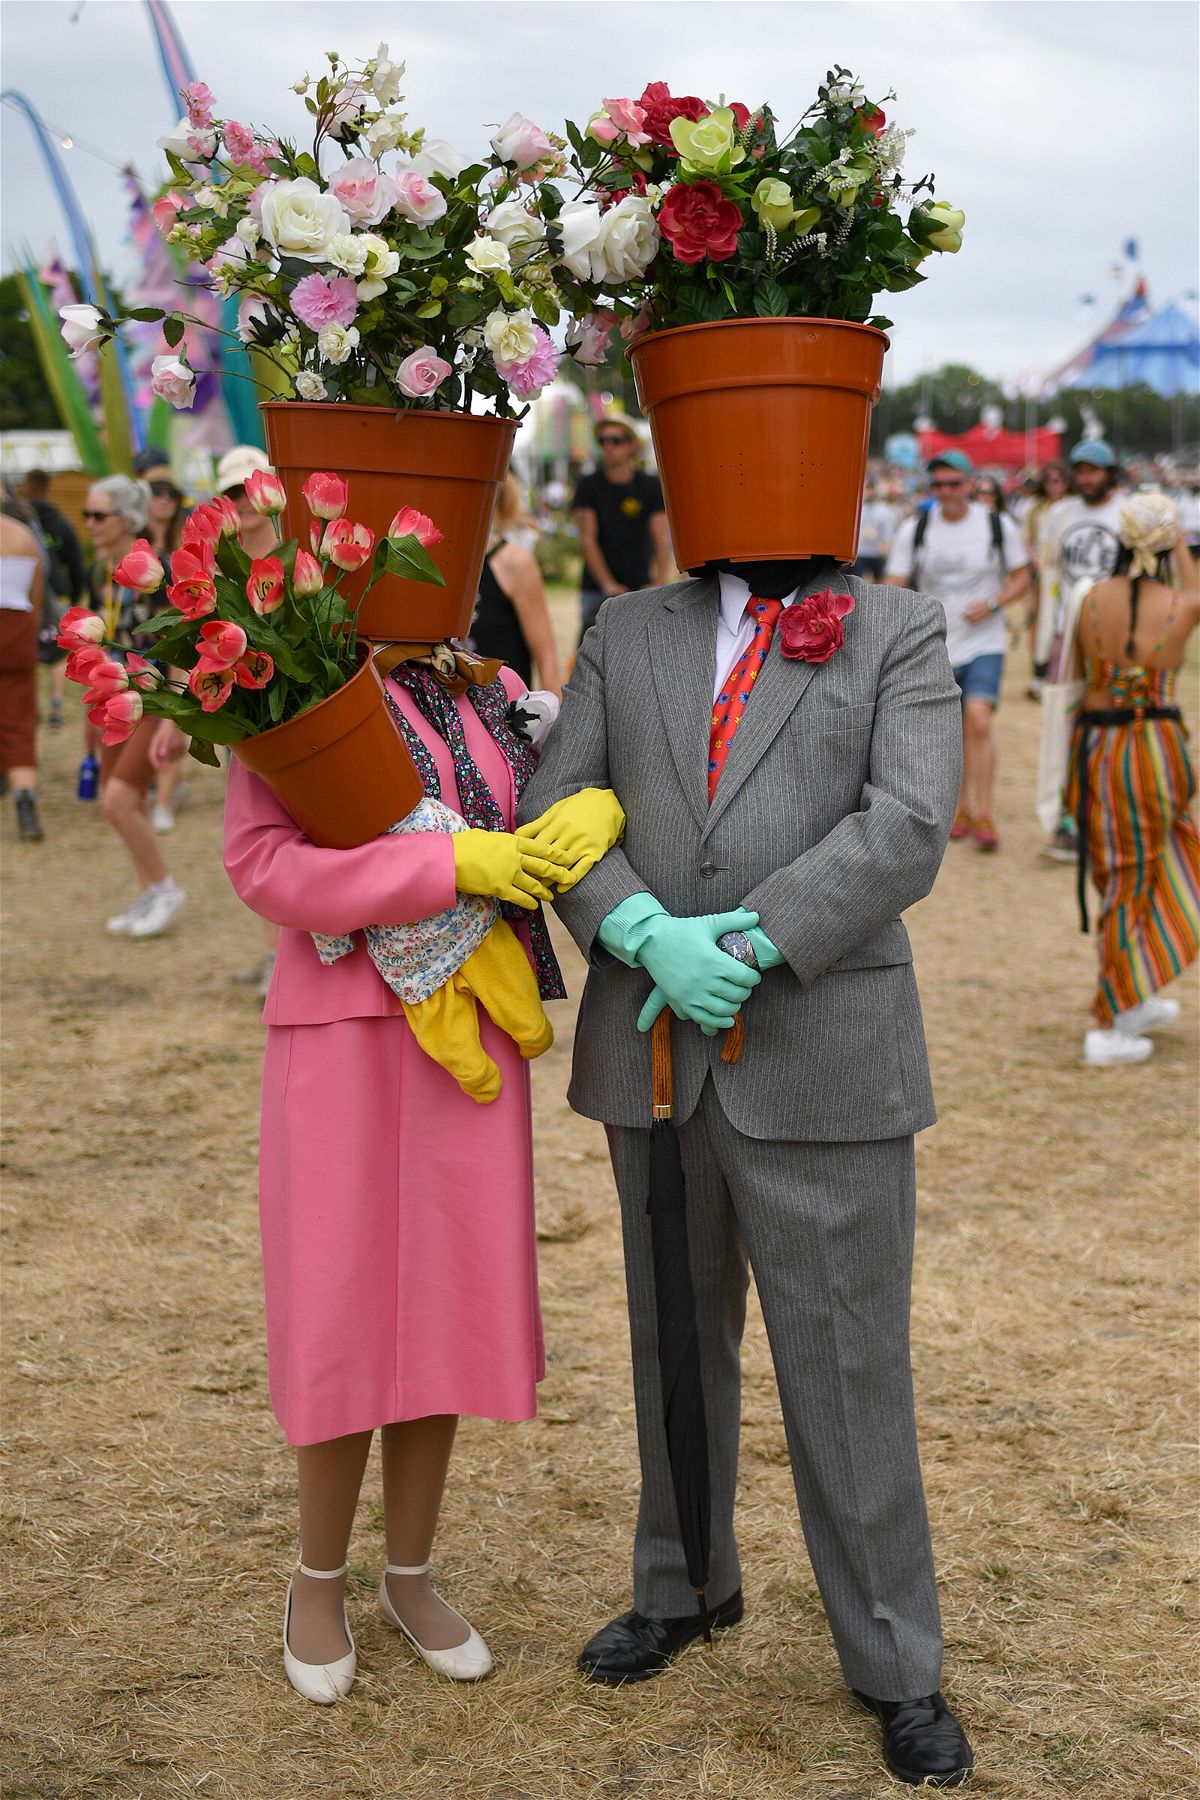 <i>Dave J Hogan/Getty Images</i><br/>A couple dressed as flower pots walk around the site during day two of Glastonbury.